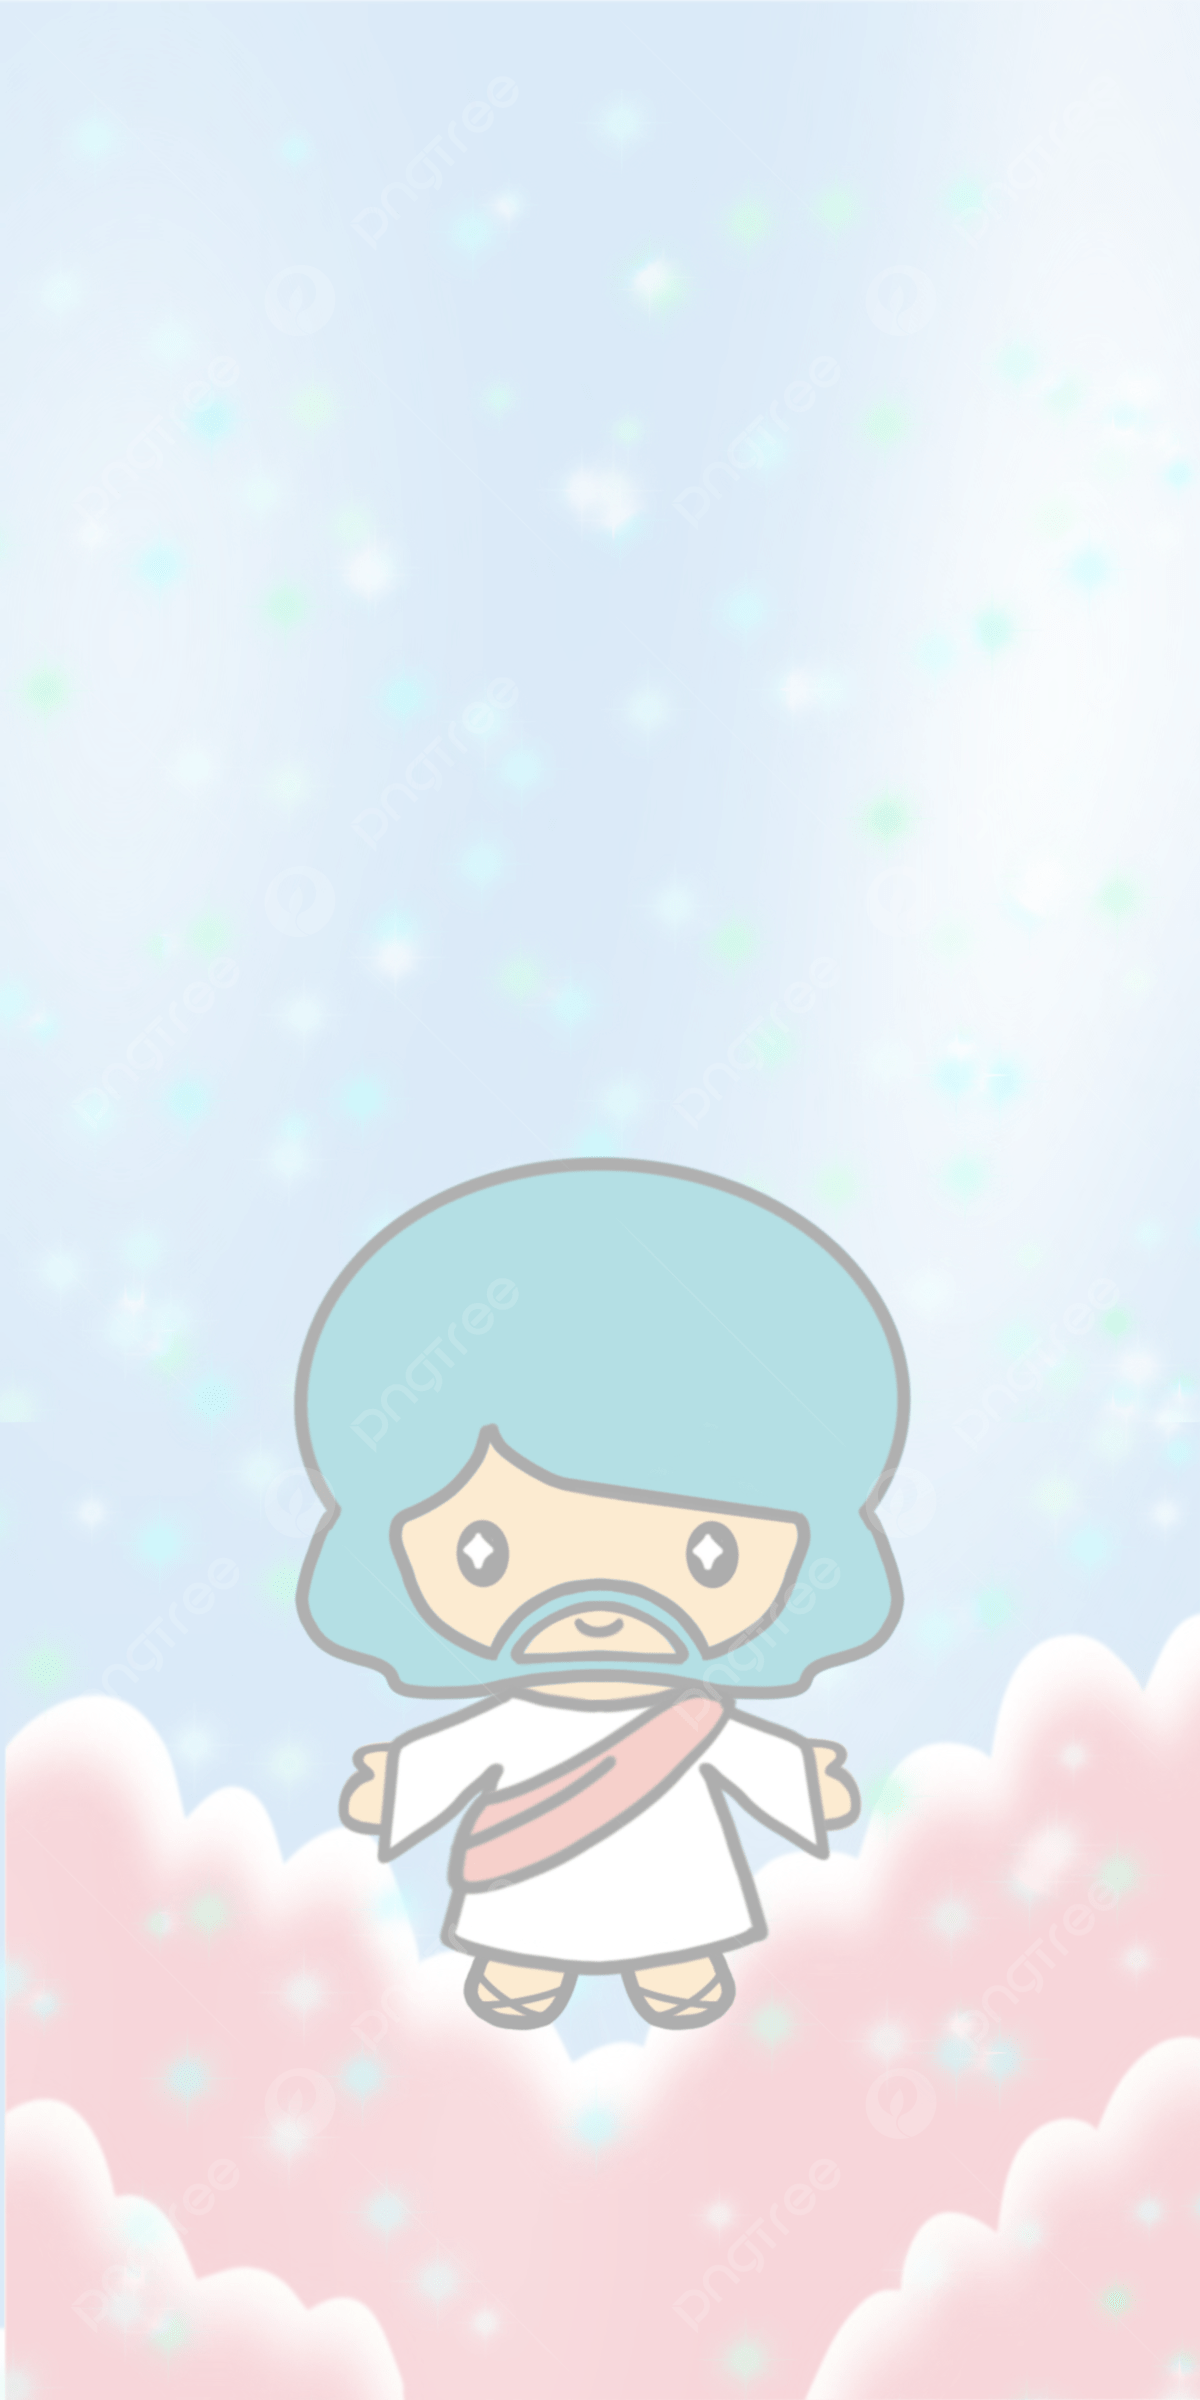 Kawaii Cute Jesus On The Clouds Mobile Wallpaper Background 300 Dpi Printable, Illustration, Faith, Christian Background Image for Free Download